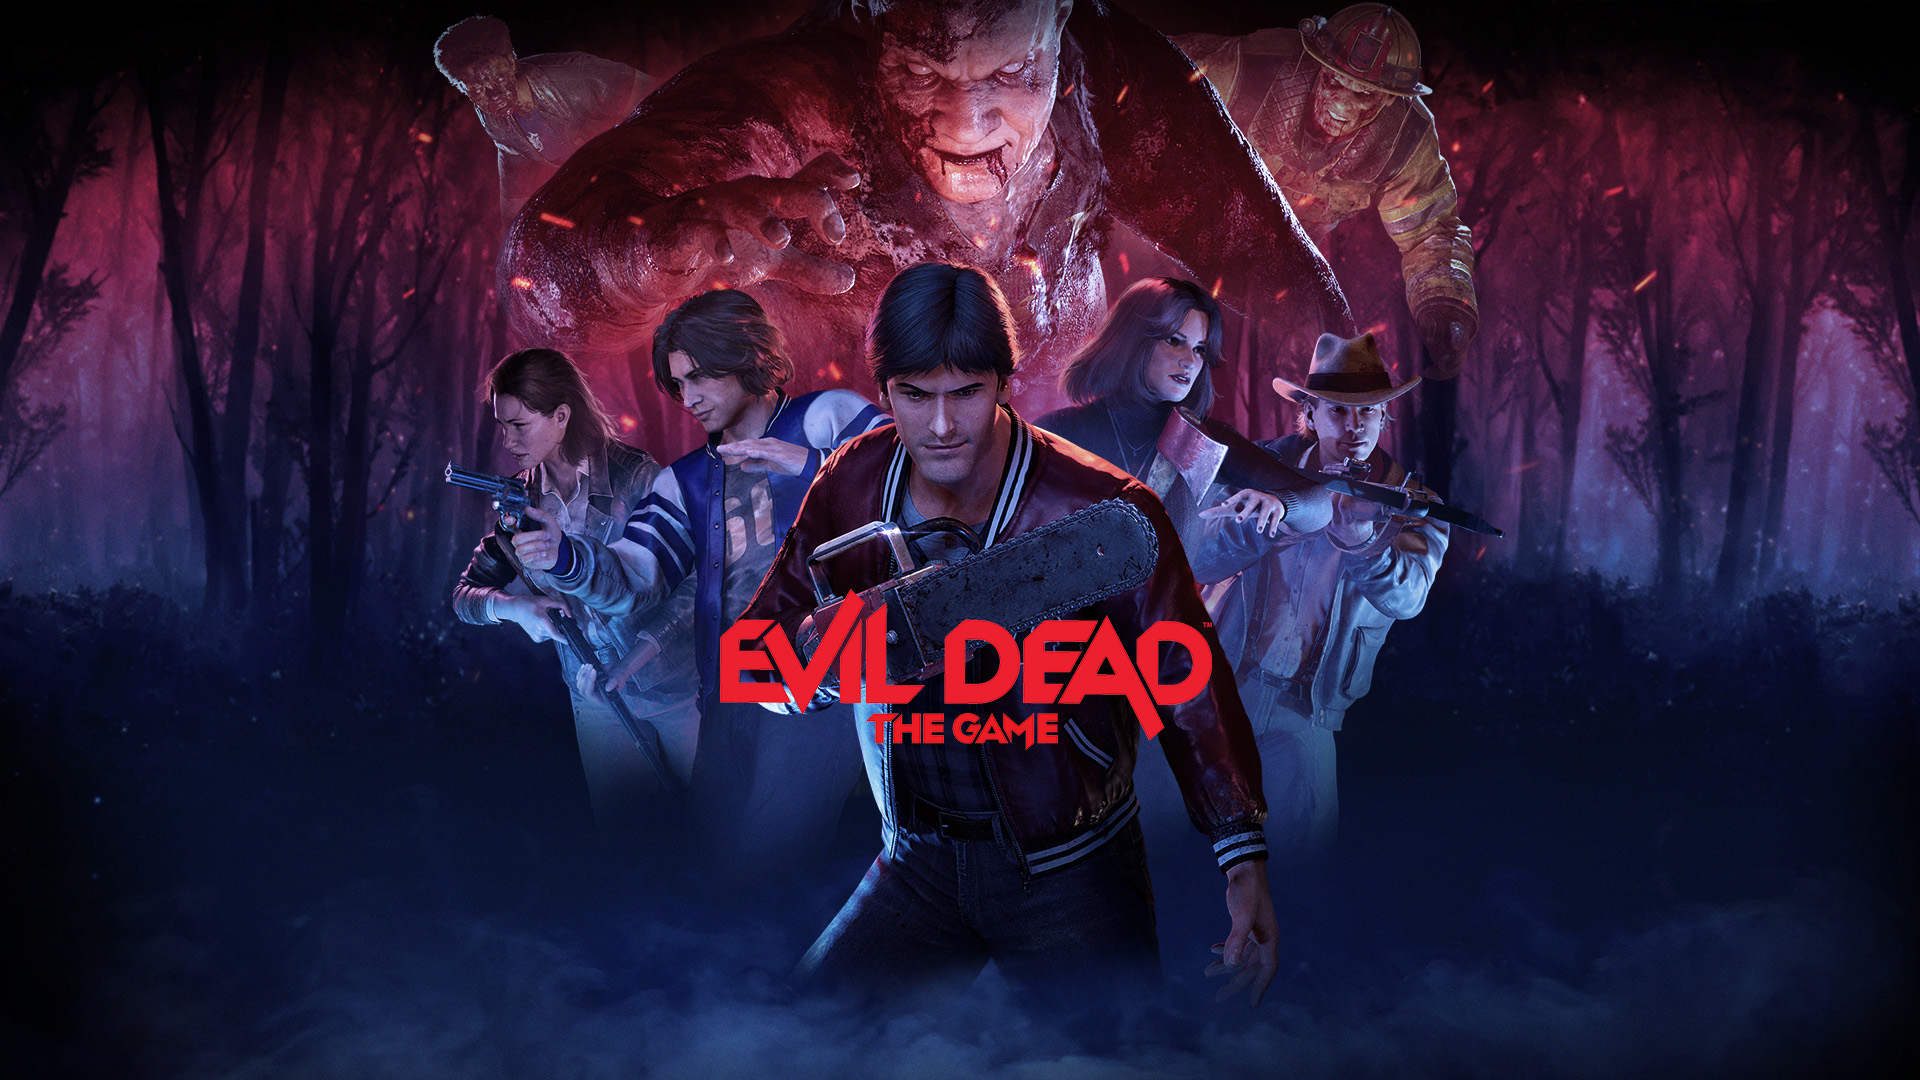 Evil Dead the Game Review: Hail to the king, baby